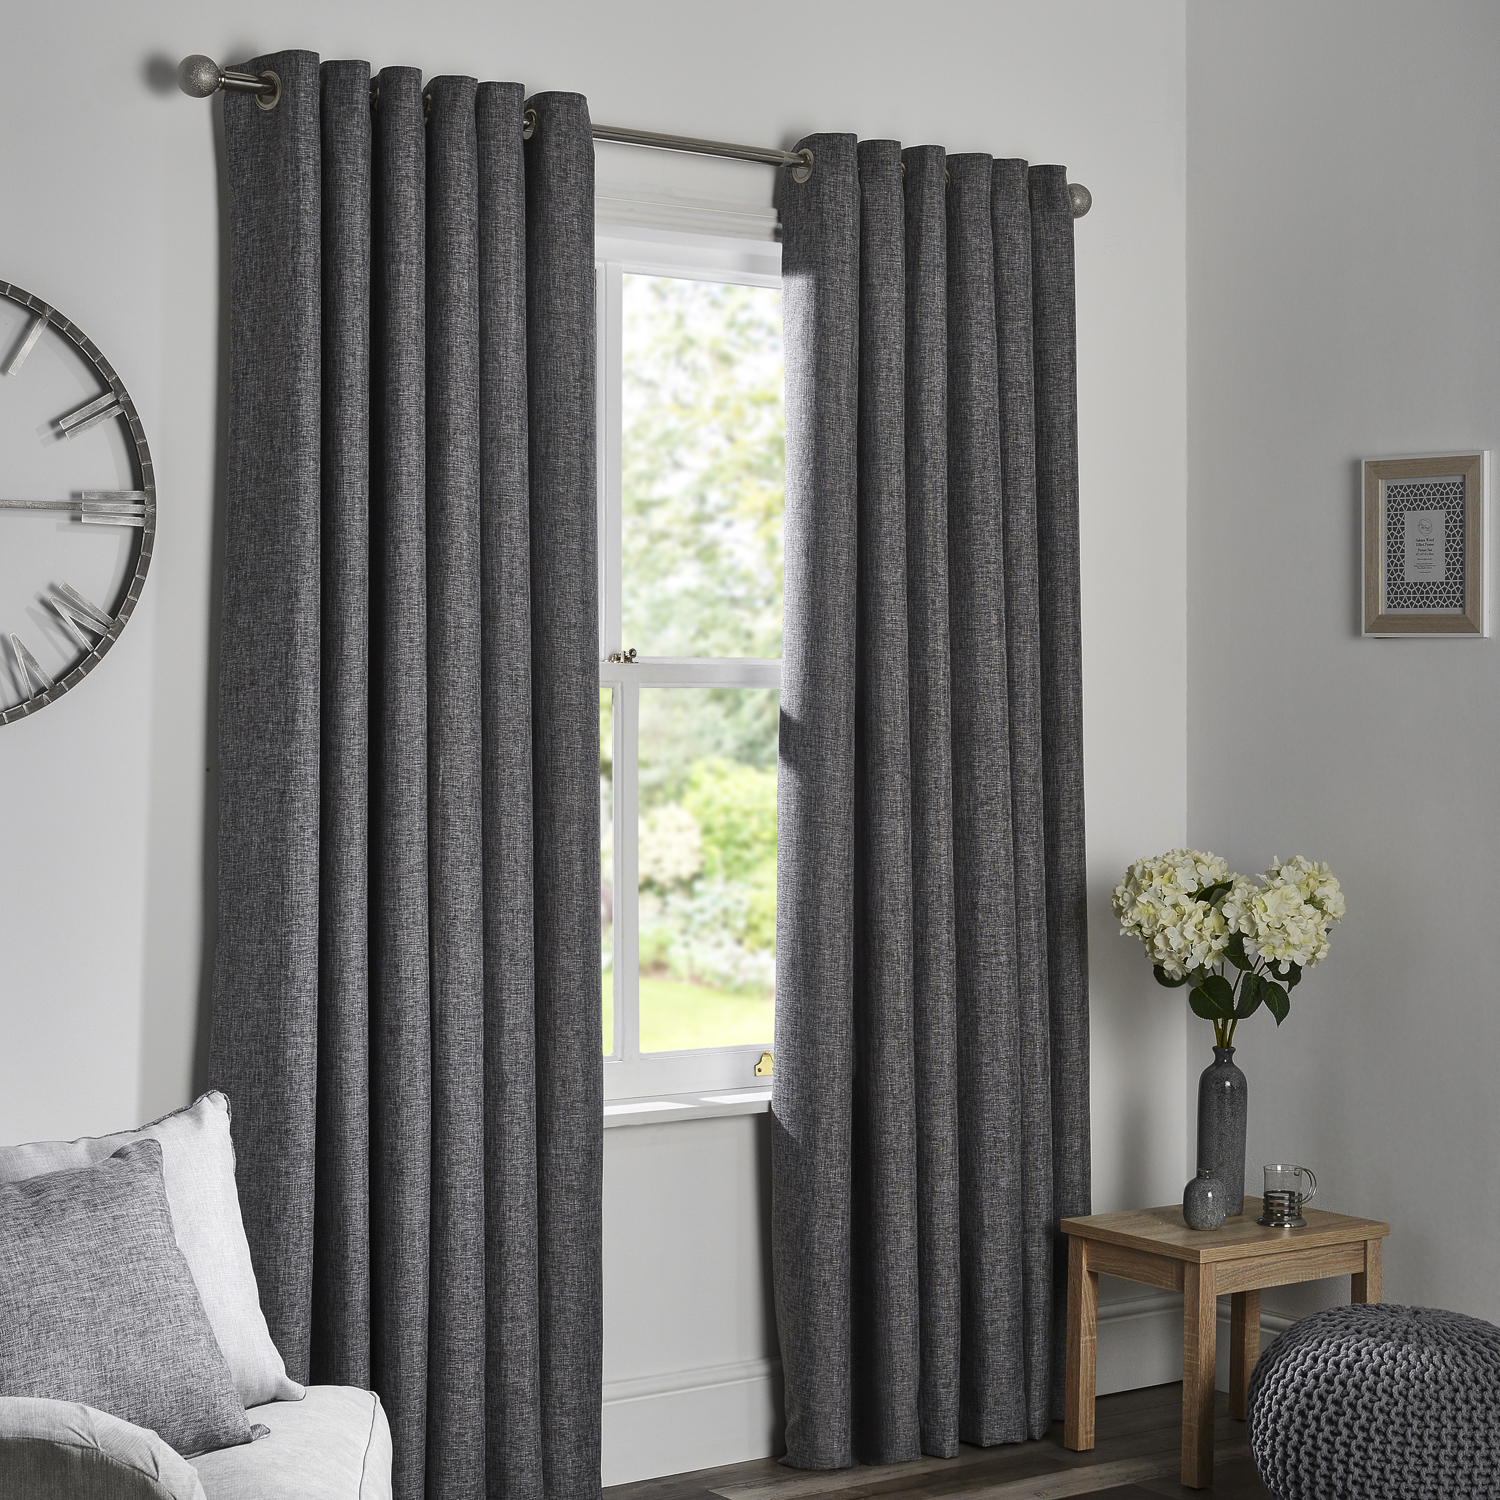 Divante Chatsworth Slate Thermal Lined Eyelet Curtains 137 x 168cm Image 2